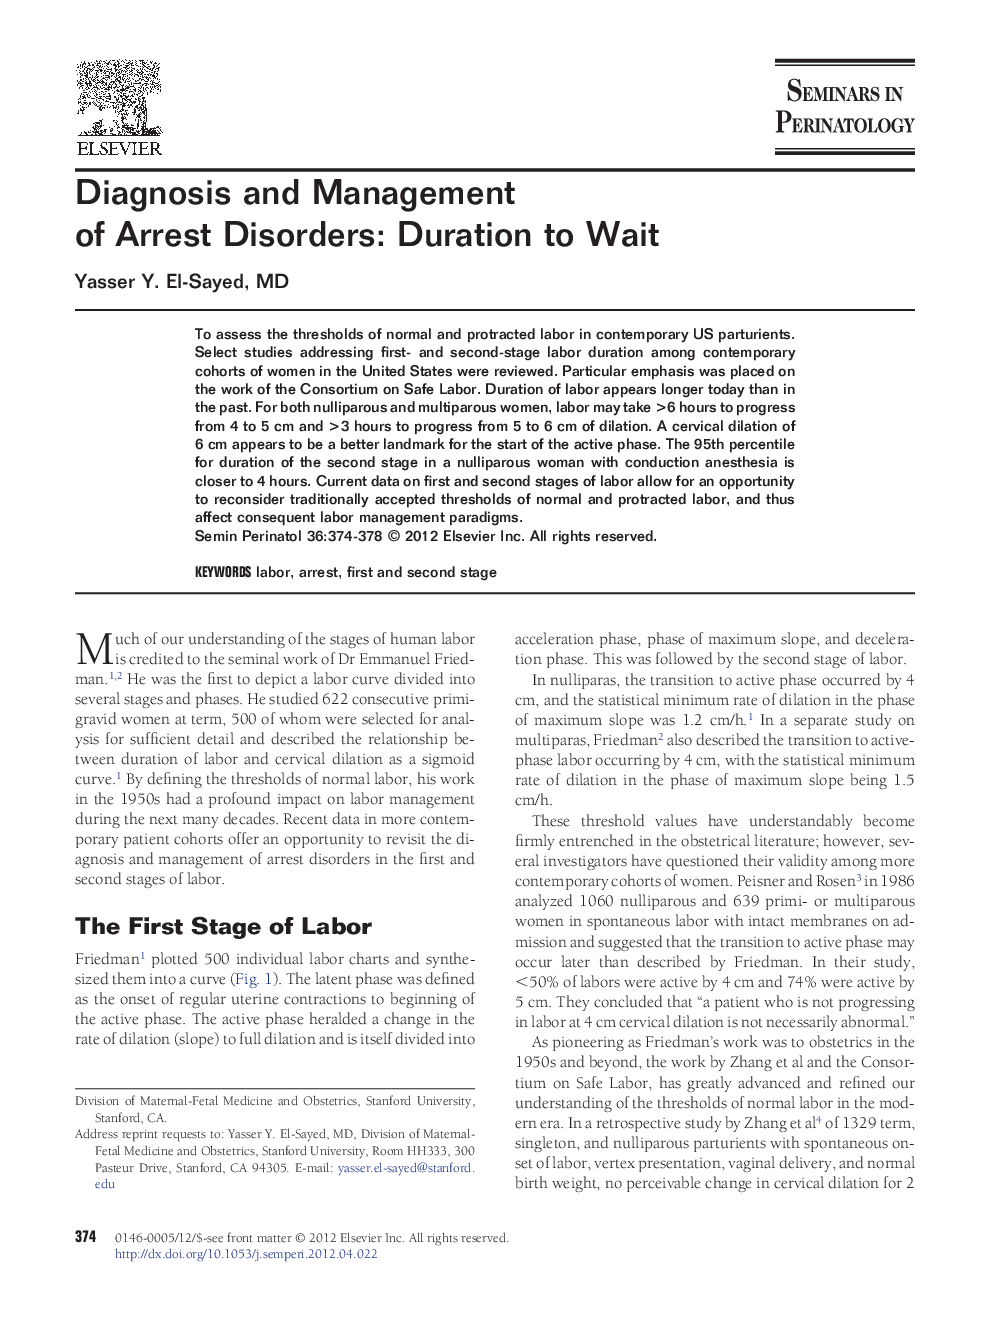 Diagnosis and Management of Arrest Disorders: Duration to Wait